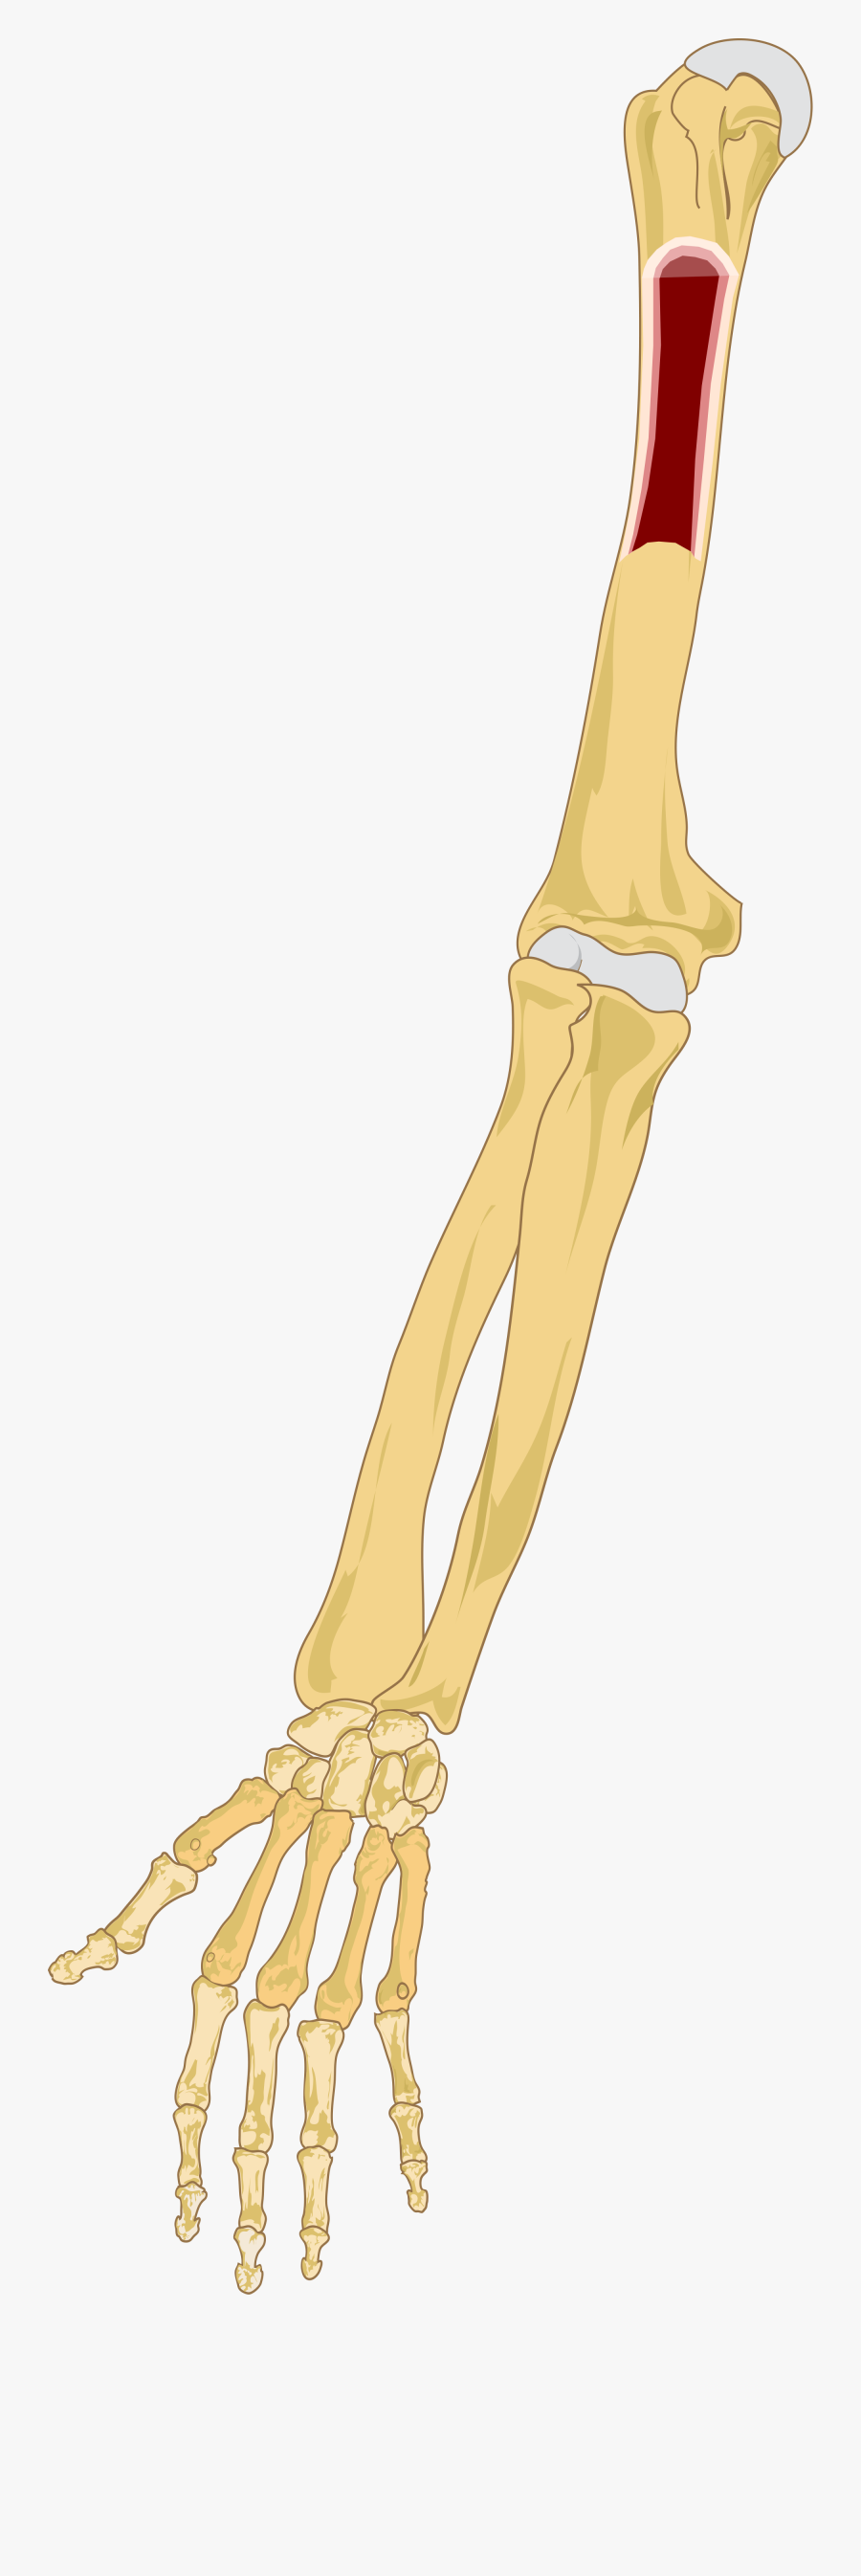 Clipart Black And White File Right Marrow Svg Wikimedia - Bone Marrow In Arm, Transparent Clipart